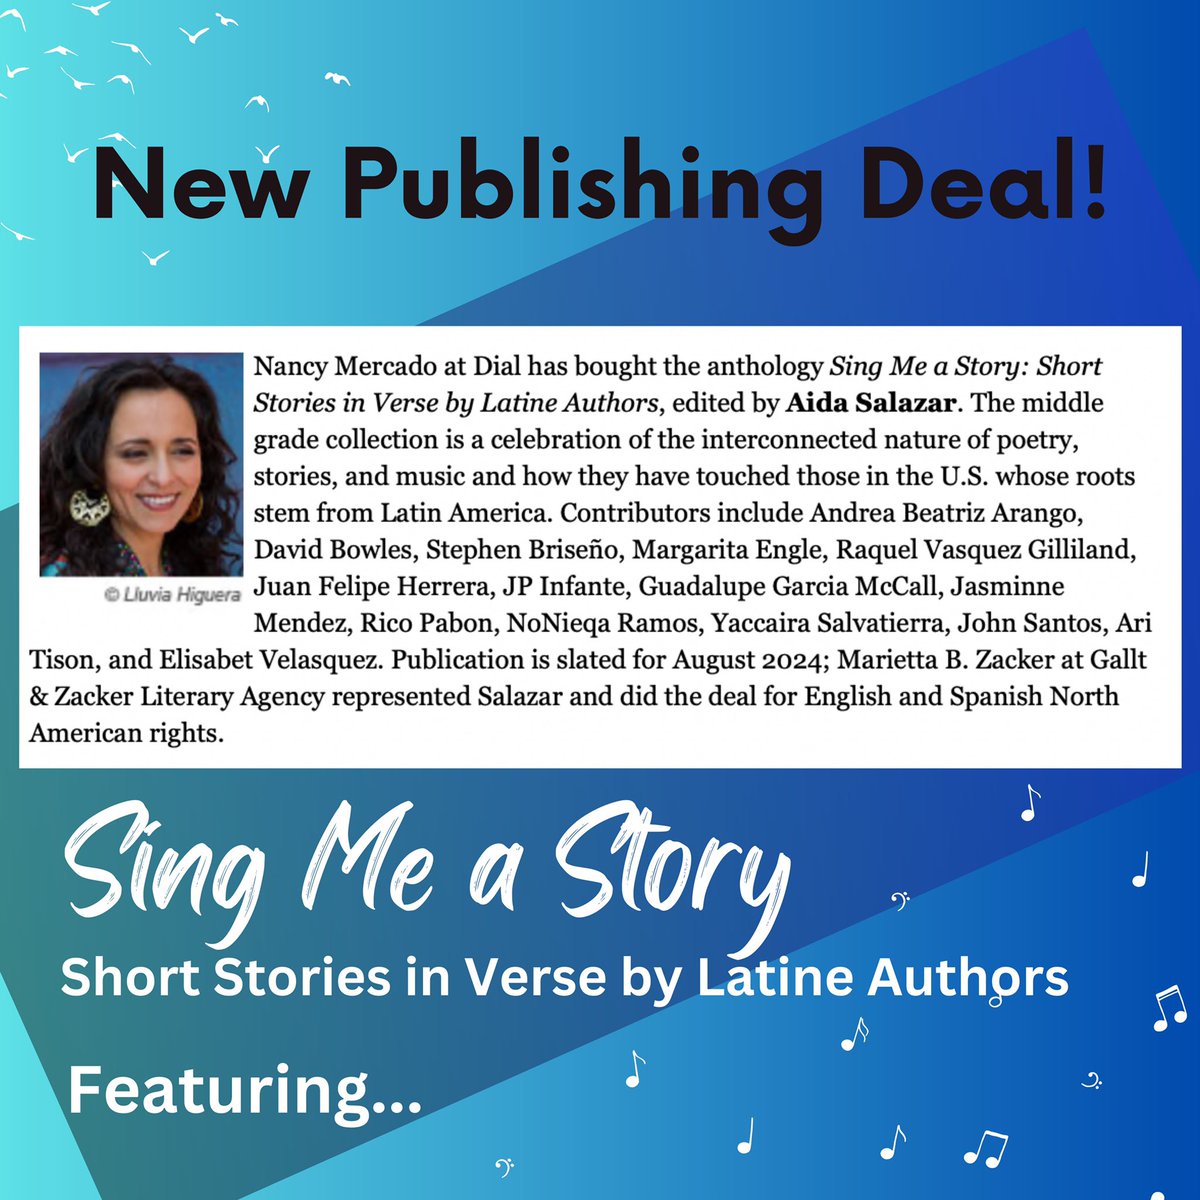 Screaming from the rooftops bc I get to edit this marvelous anthology of short stories in verse! Featuring…

@PenguinClass @penguinkids @nanmercado @GalltZacker #poetry #versenovels #SingMeaStory